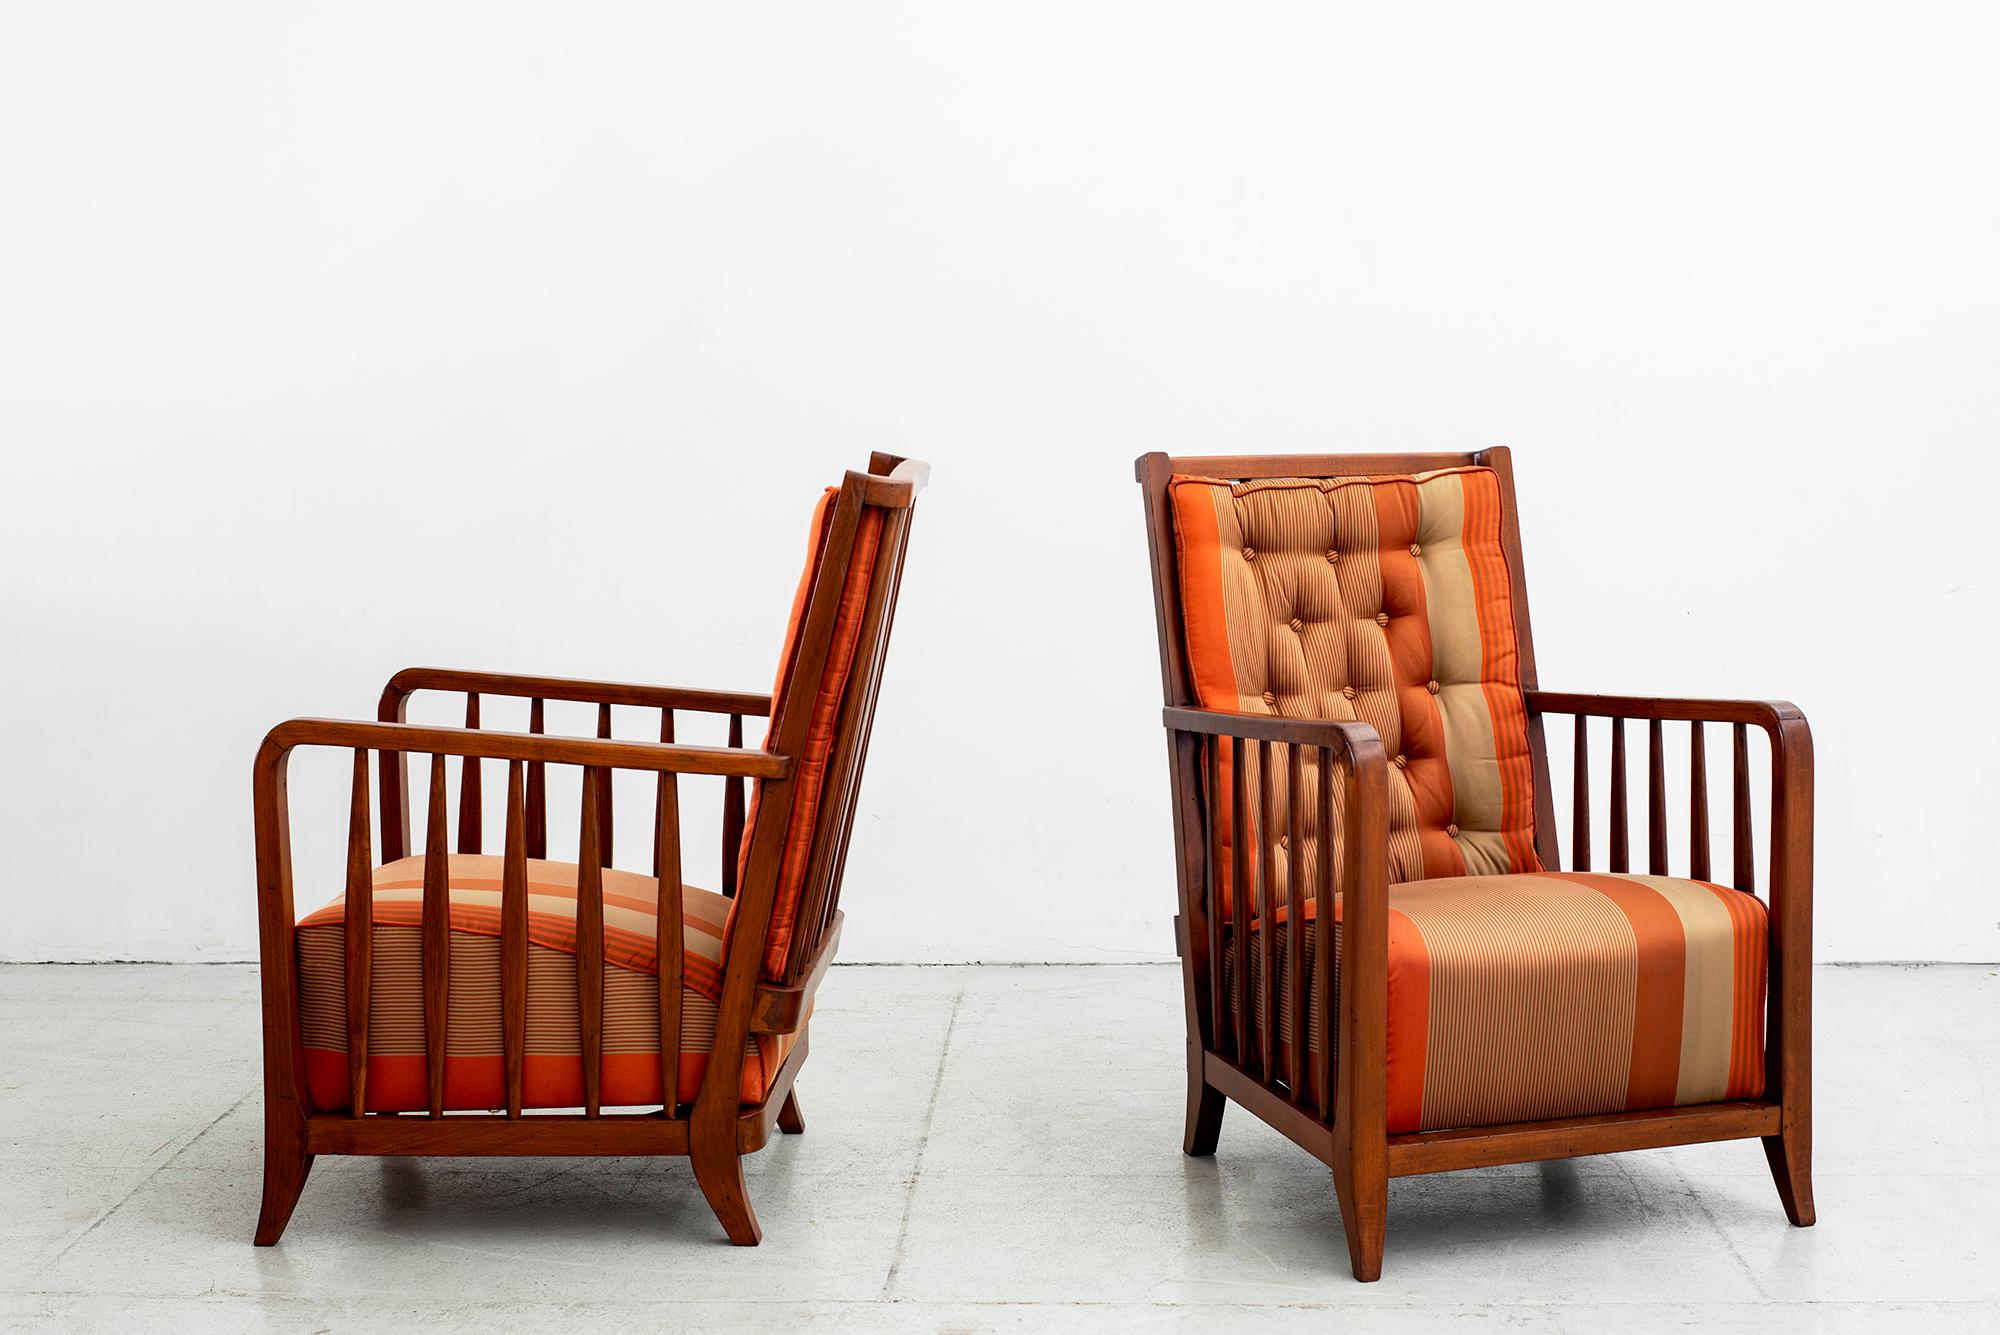 Pair of Paolo Buffa armchairs, Italy, circa 1940s
Wood spindled back and arms 
Sculpted armrests and tapered legs.
 